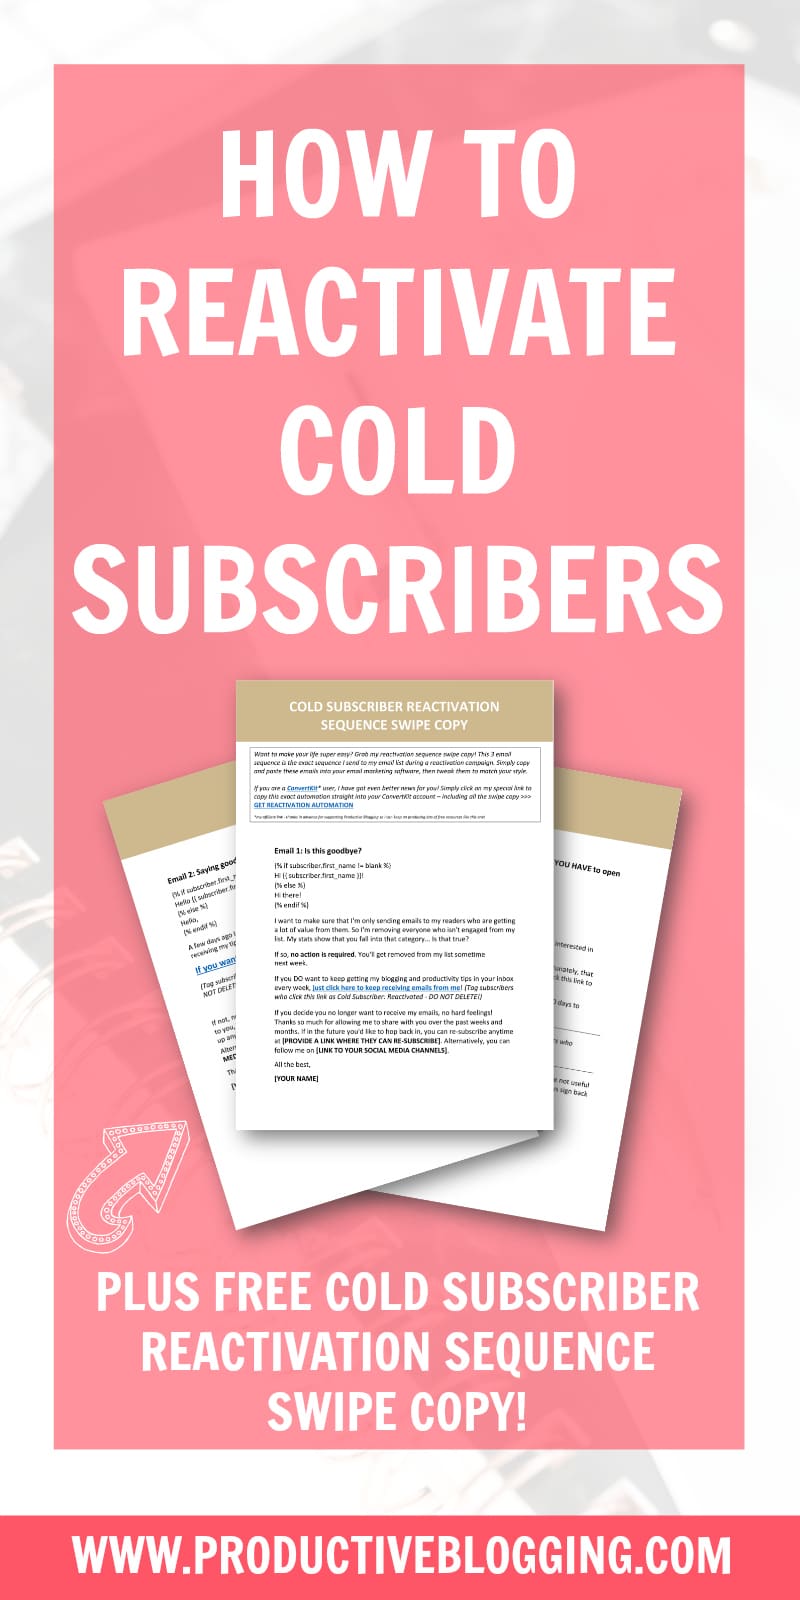 Instead of simply deleting cold subscribers, why not try and reactivate them? Here’s my step by step guide to running a reactivation campaign for your cold subscribers. #reactivatecoldsubscribers #coldsubscriberreactivation #reactivationsequence #coldsubscribers #listcleaning #emailmarketing #emaillist #emailmarketingtips #listbuilding #subscribers #convertkit #blogging #bloggers #bloggingtips #productiveblogging #blogsmarter #blogsmarternotharder